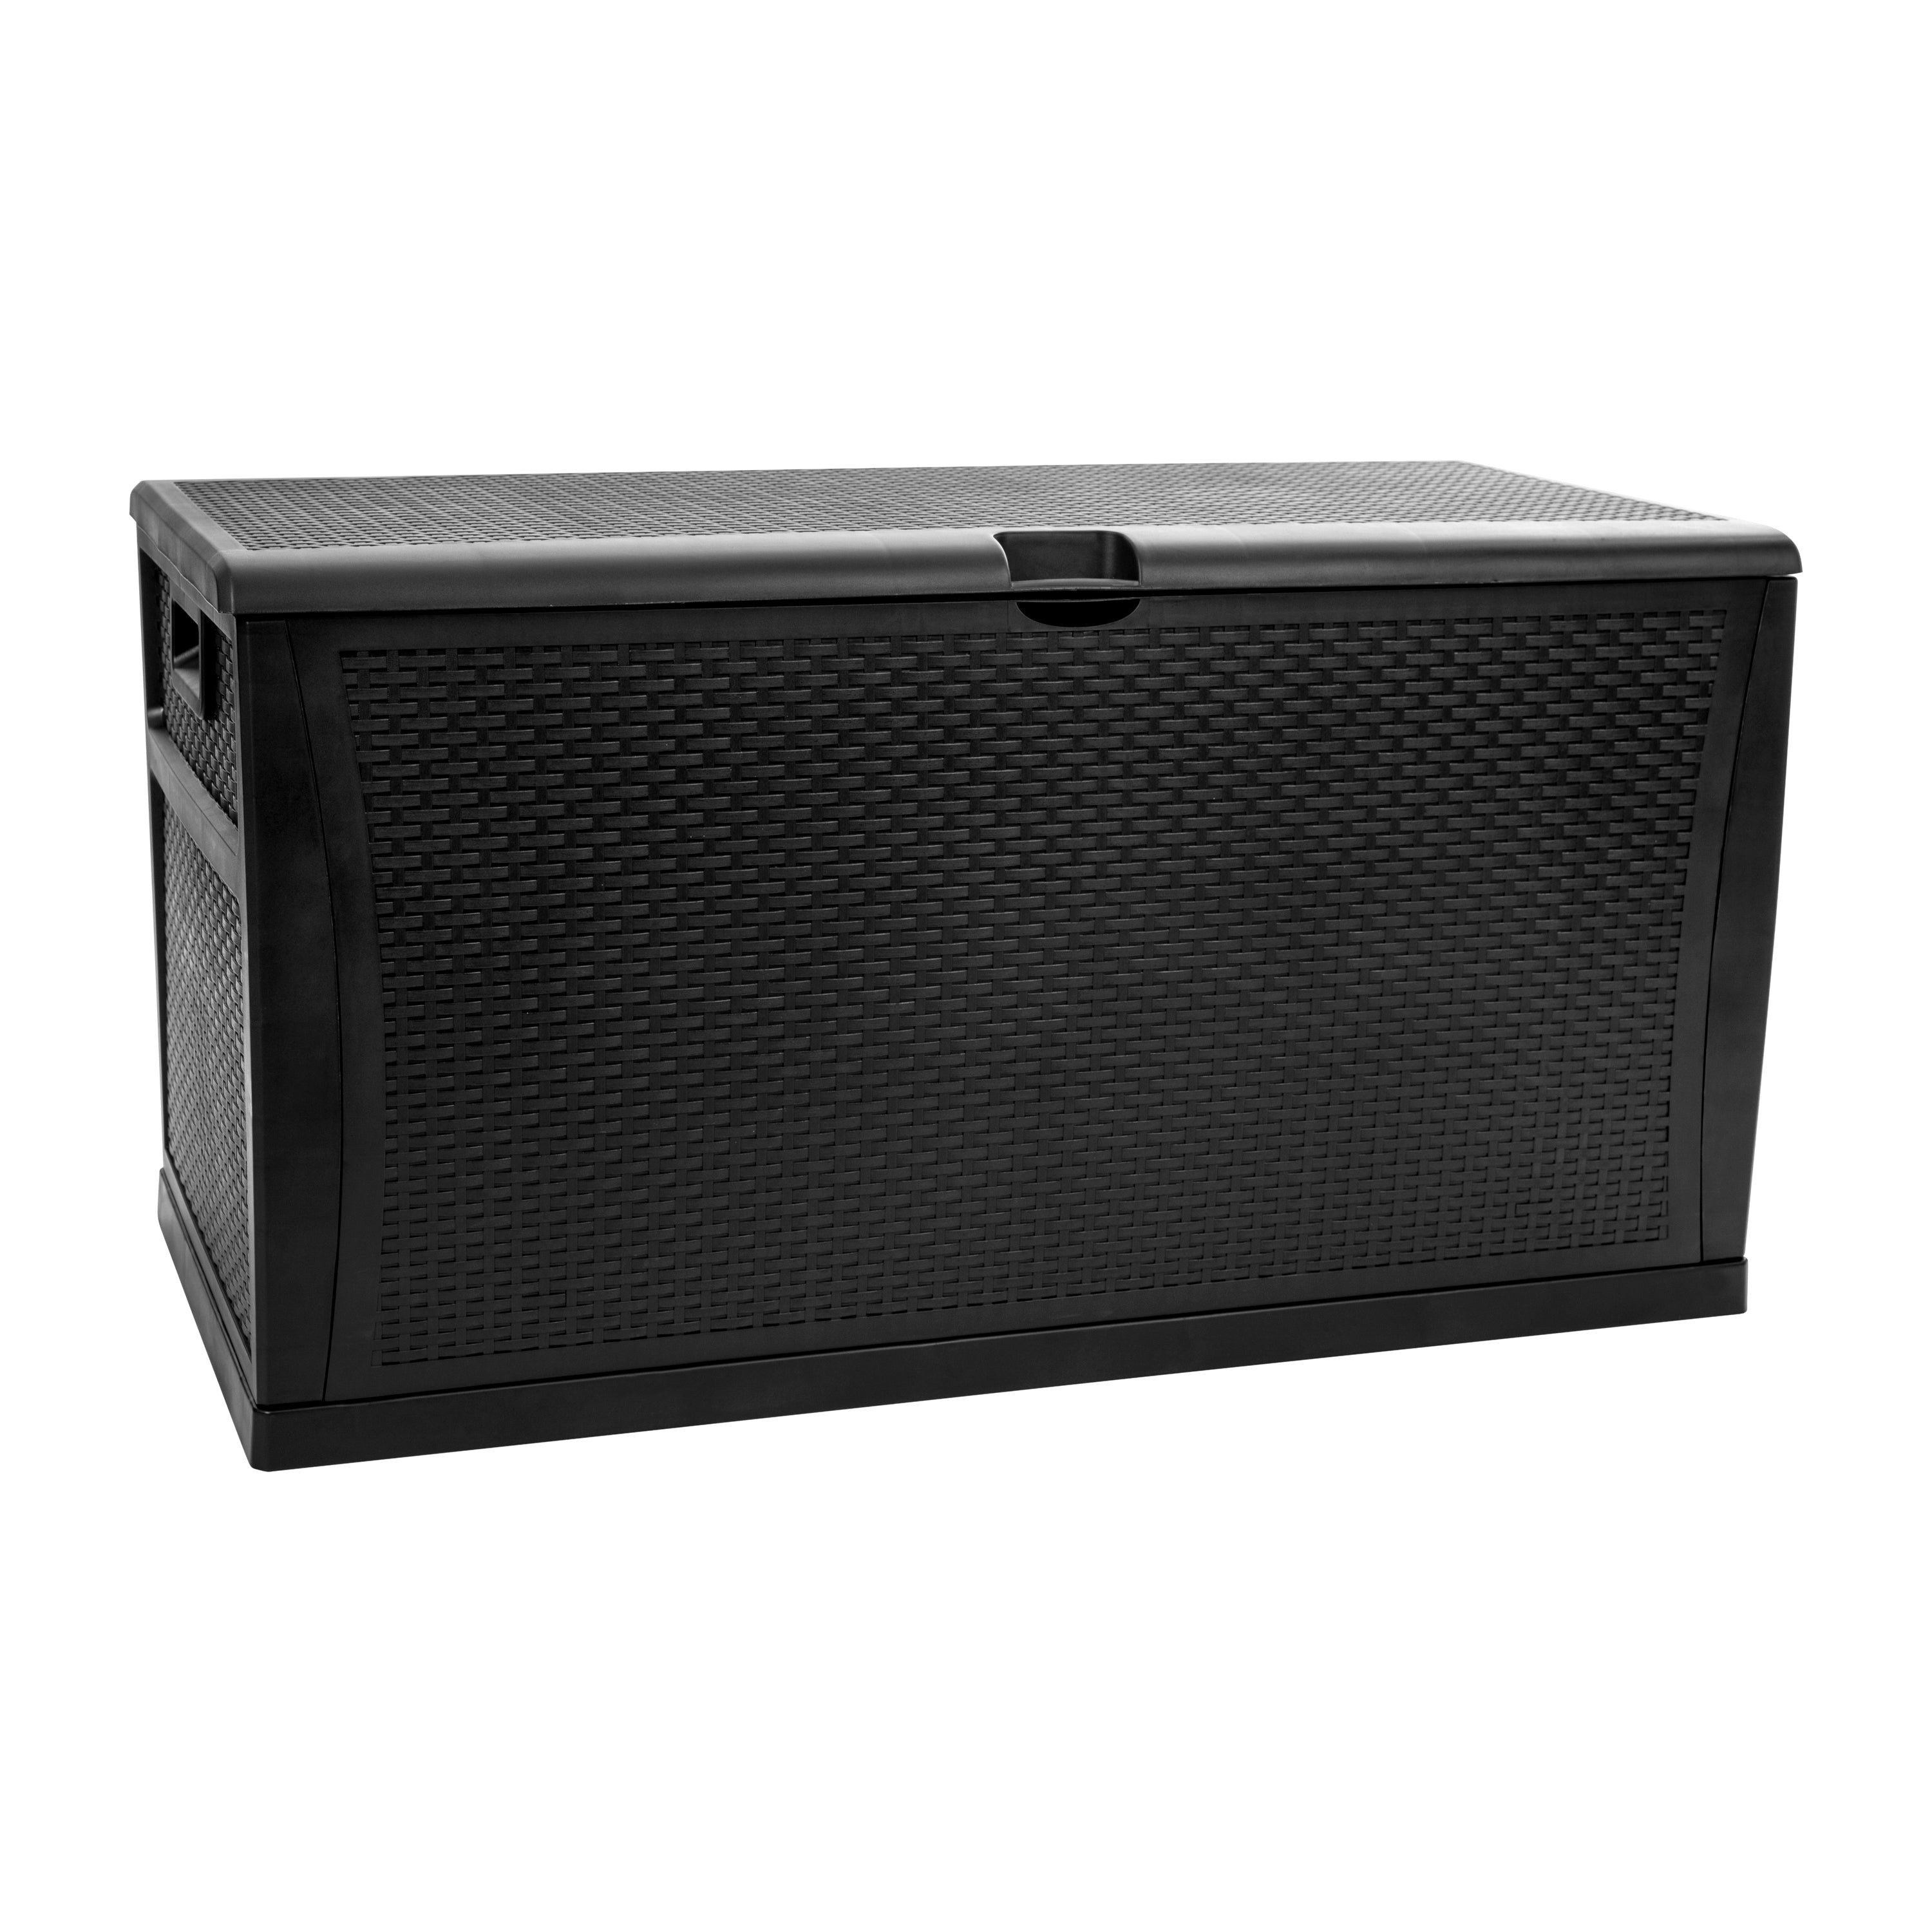 Nobu 120 Gallon Plastic Deck Box - Outdoor Waterproof Storage Box for Patio Cushions, Garden Tools and Pool Toys-Patio Storage Boxes-Flash Furniture-Wall2Wall Furnishings